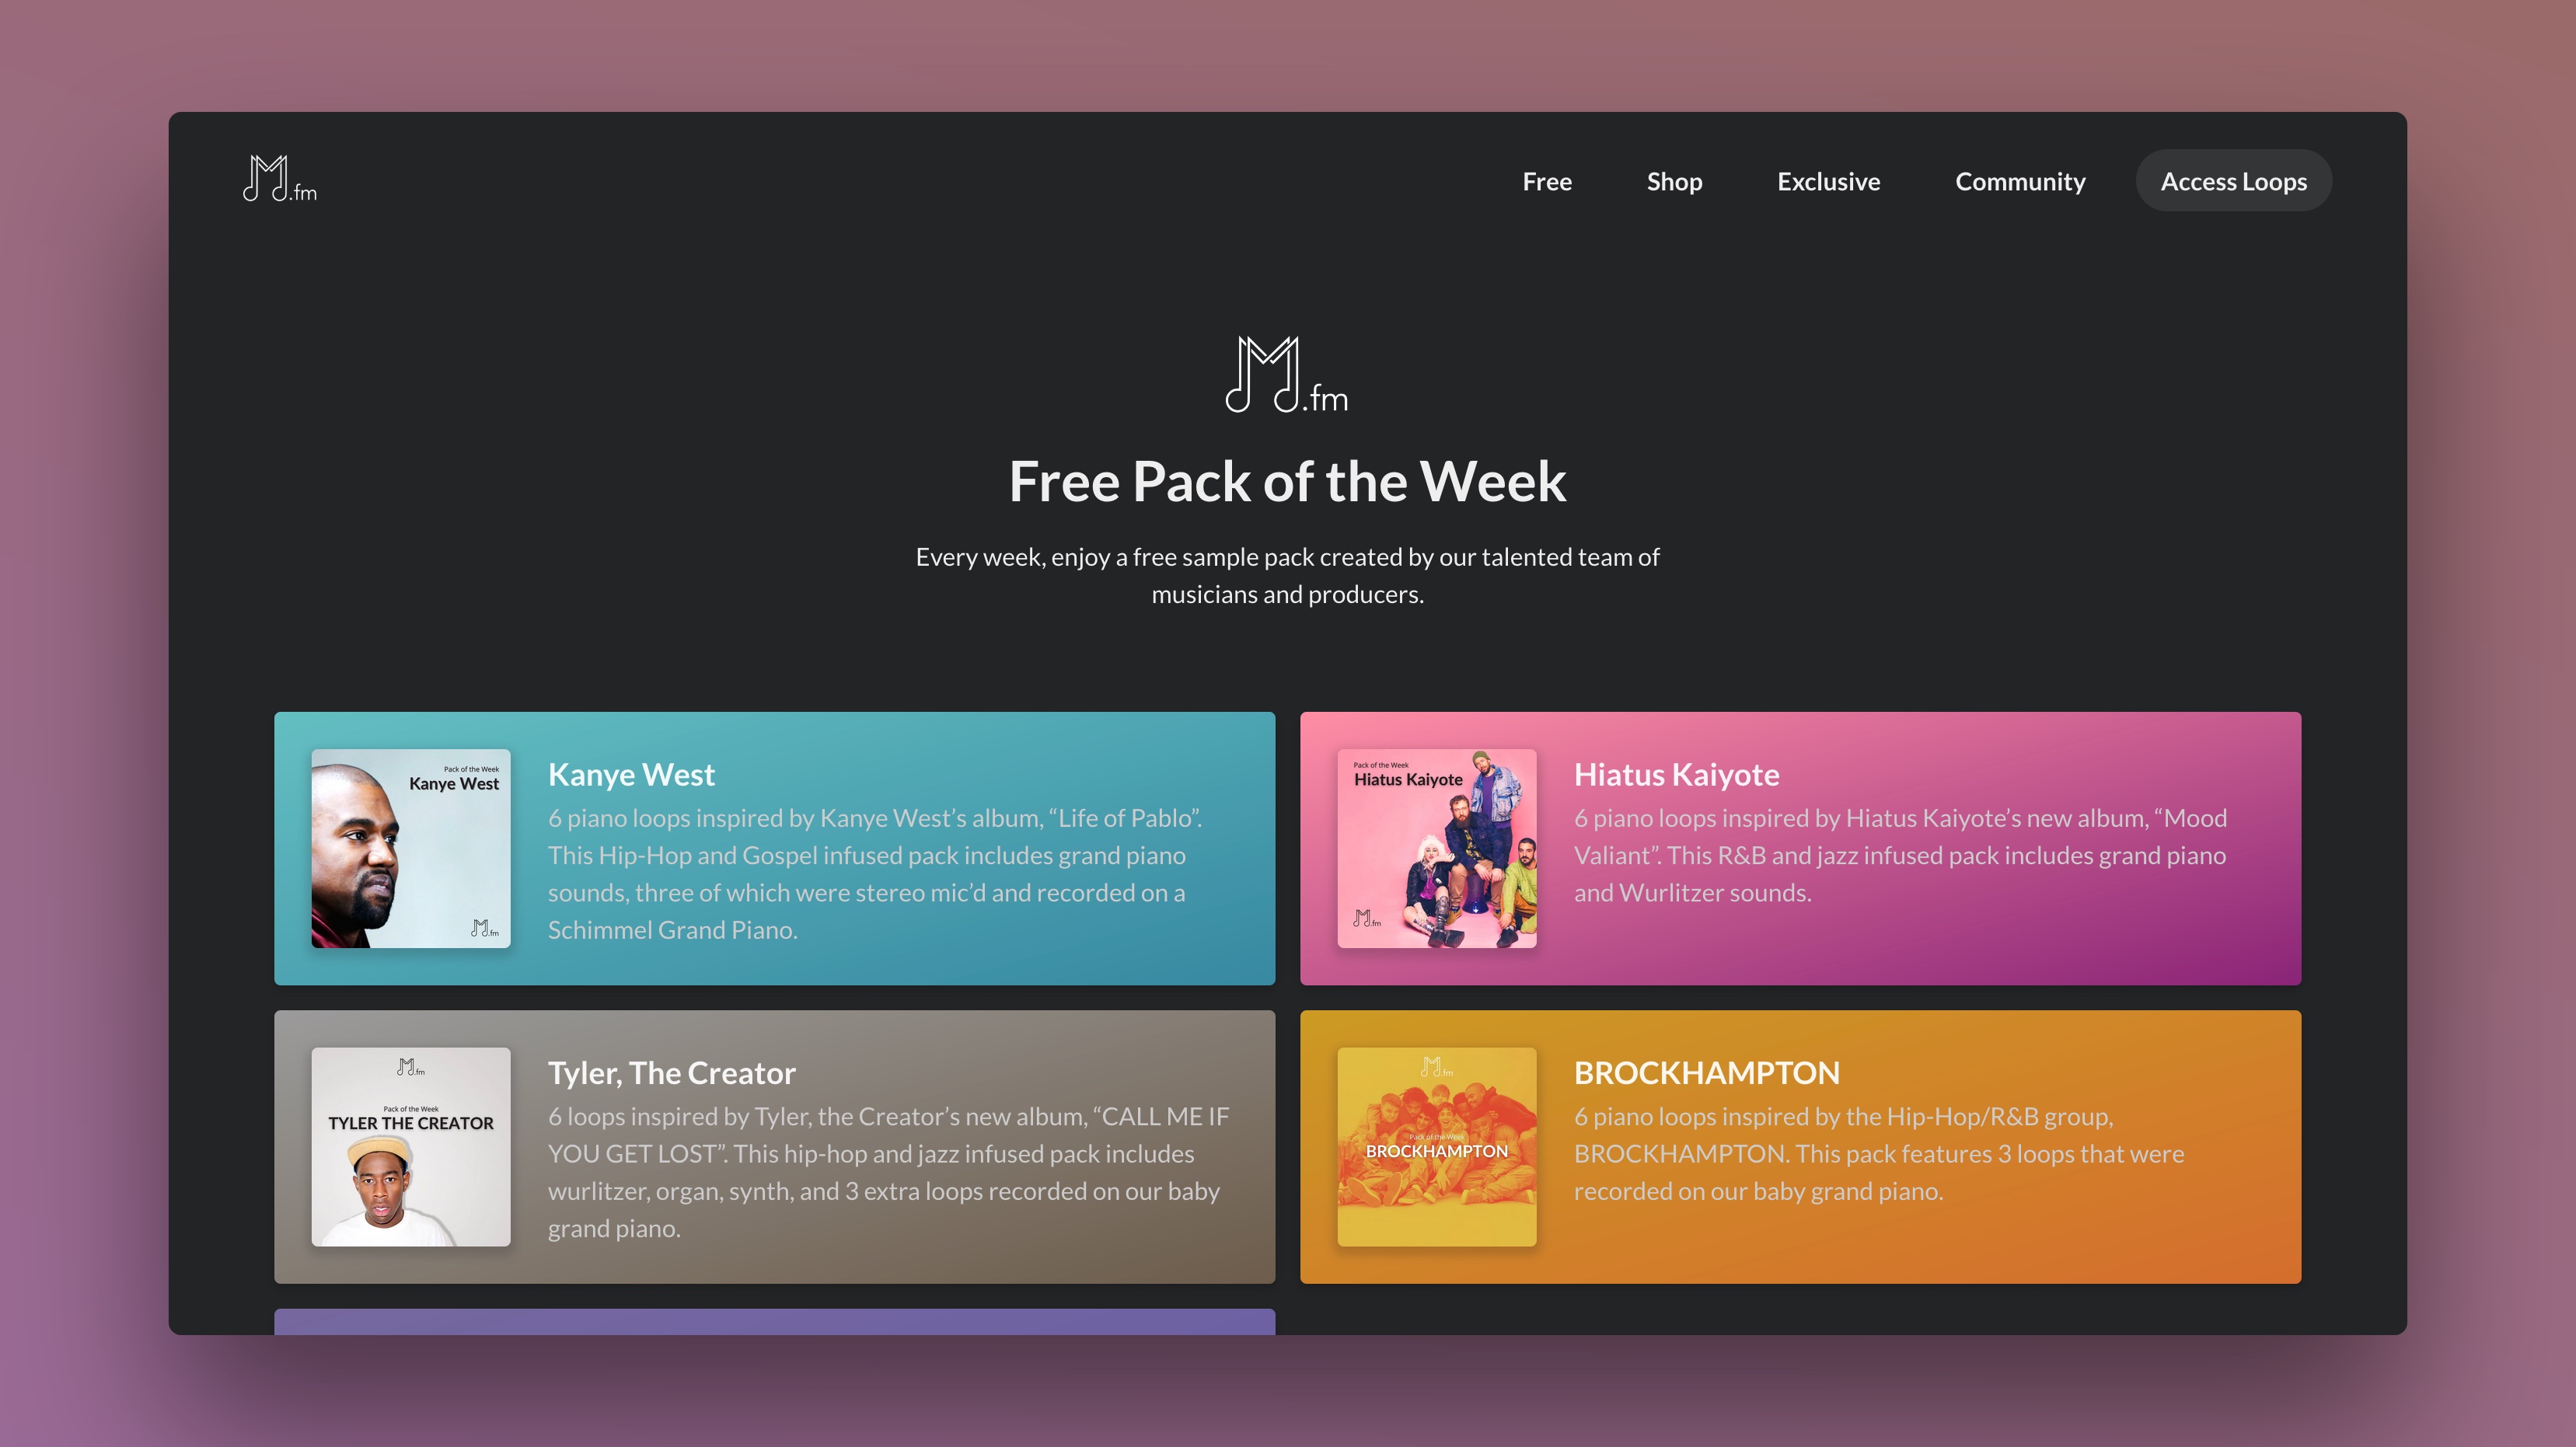 Screenshot of the Modern.fm free pack of the week page